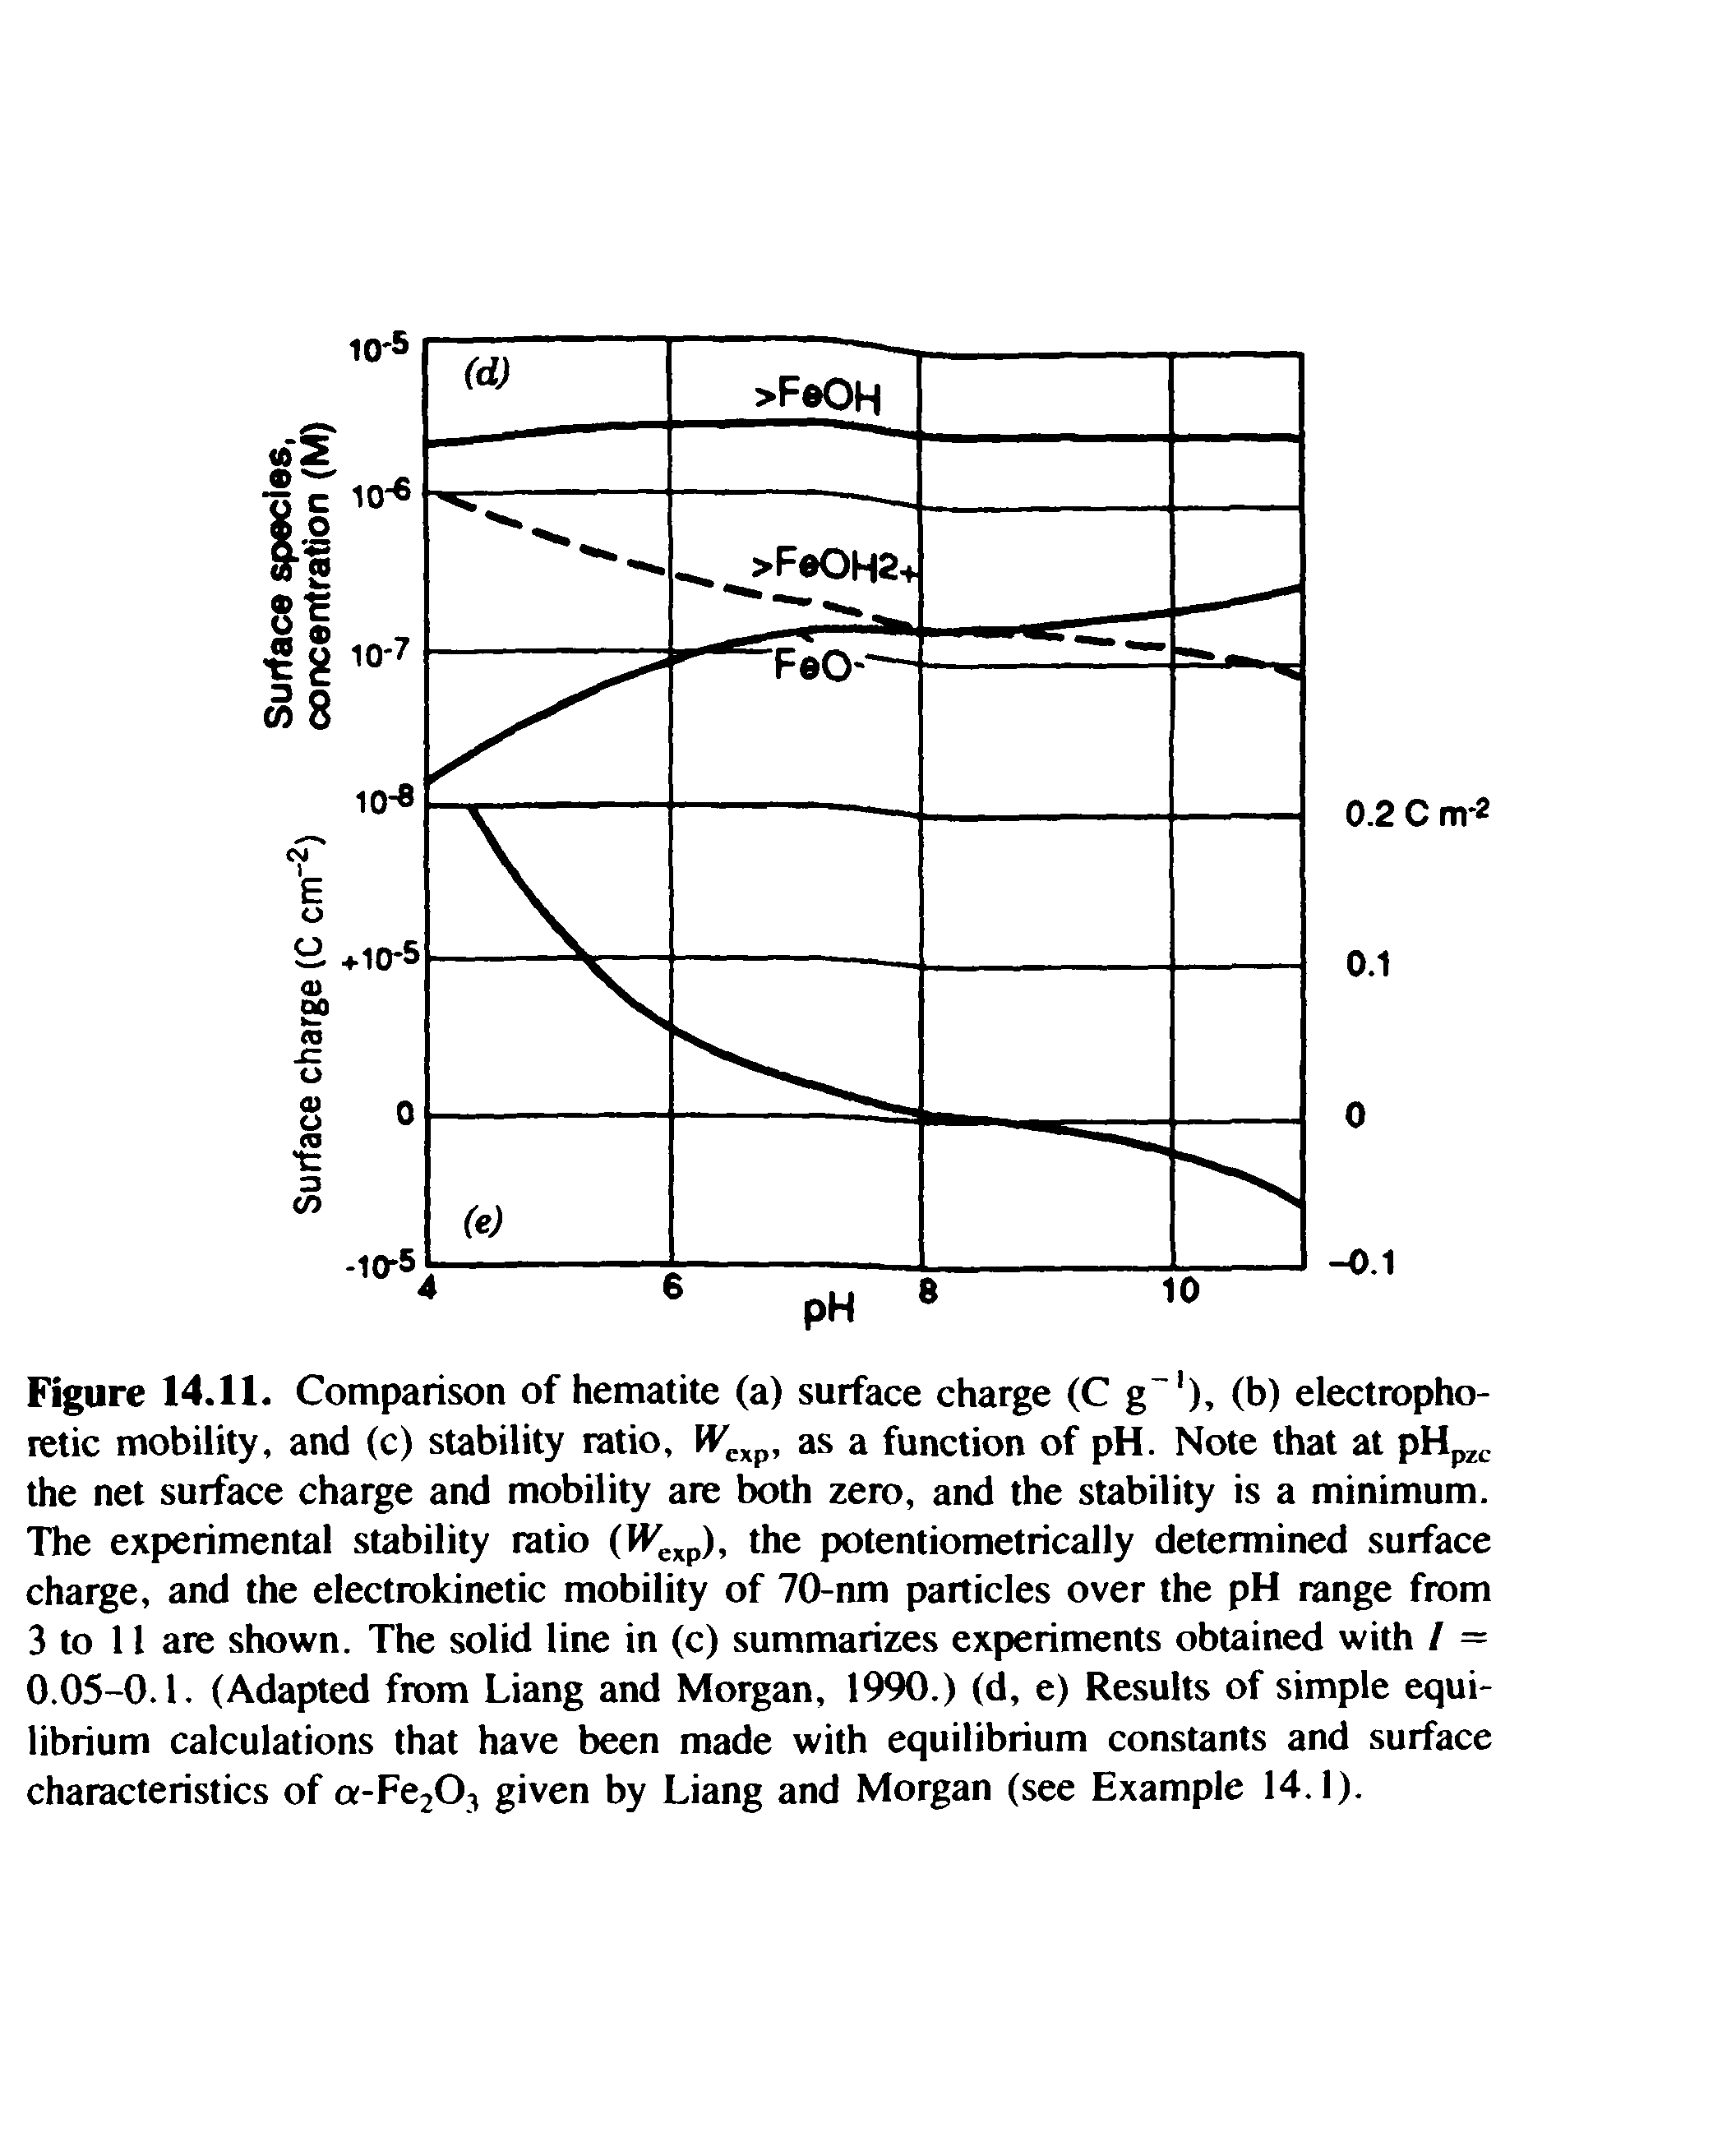 Figure 14.11. Comparison of hematite (a) surface charge (C g ), (b) electrophoretic mobility, and (c) stability ratio, as a function of pH. Note that at pHp the net surface charge and mobility are both zero, and the stability is a minimum. The experimental stability ratio (IFexp). the potentiometrically determined surface charge, and the electrokinetic mobility of 70-nm particles over the pH range from 3 to 11 are shown. The solid line in (c) summarizes experiments obtained with / = 0.05-0.1. (Adapted from Liang and Morgan, 1990.) (d, e) Results of simple equilibrium calculations that have been made with equilibrium constants and surface characteristics of a-Fe203 given by Liang and Morgan (see Example 14.1).